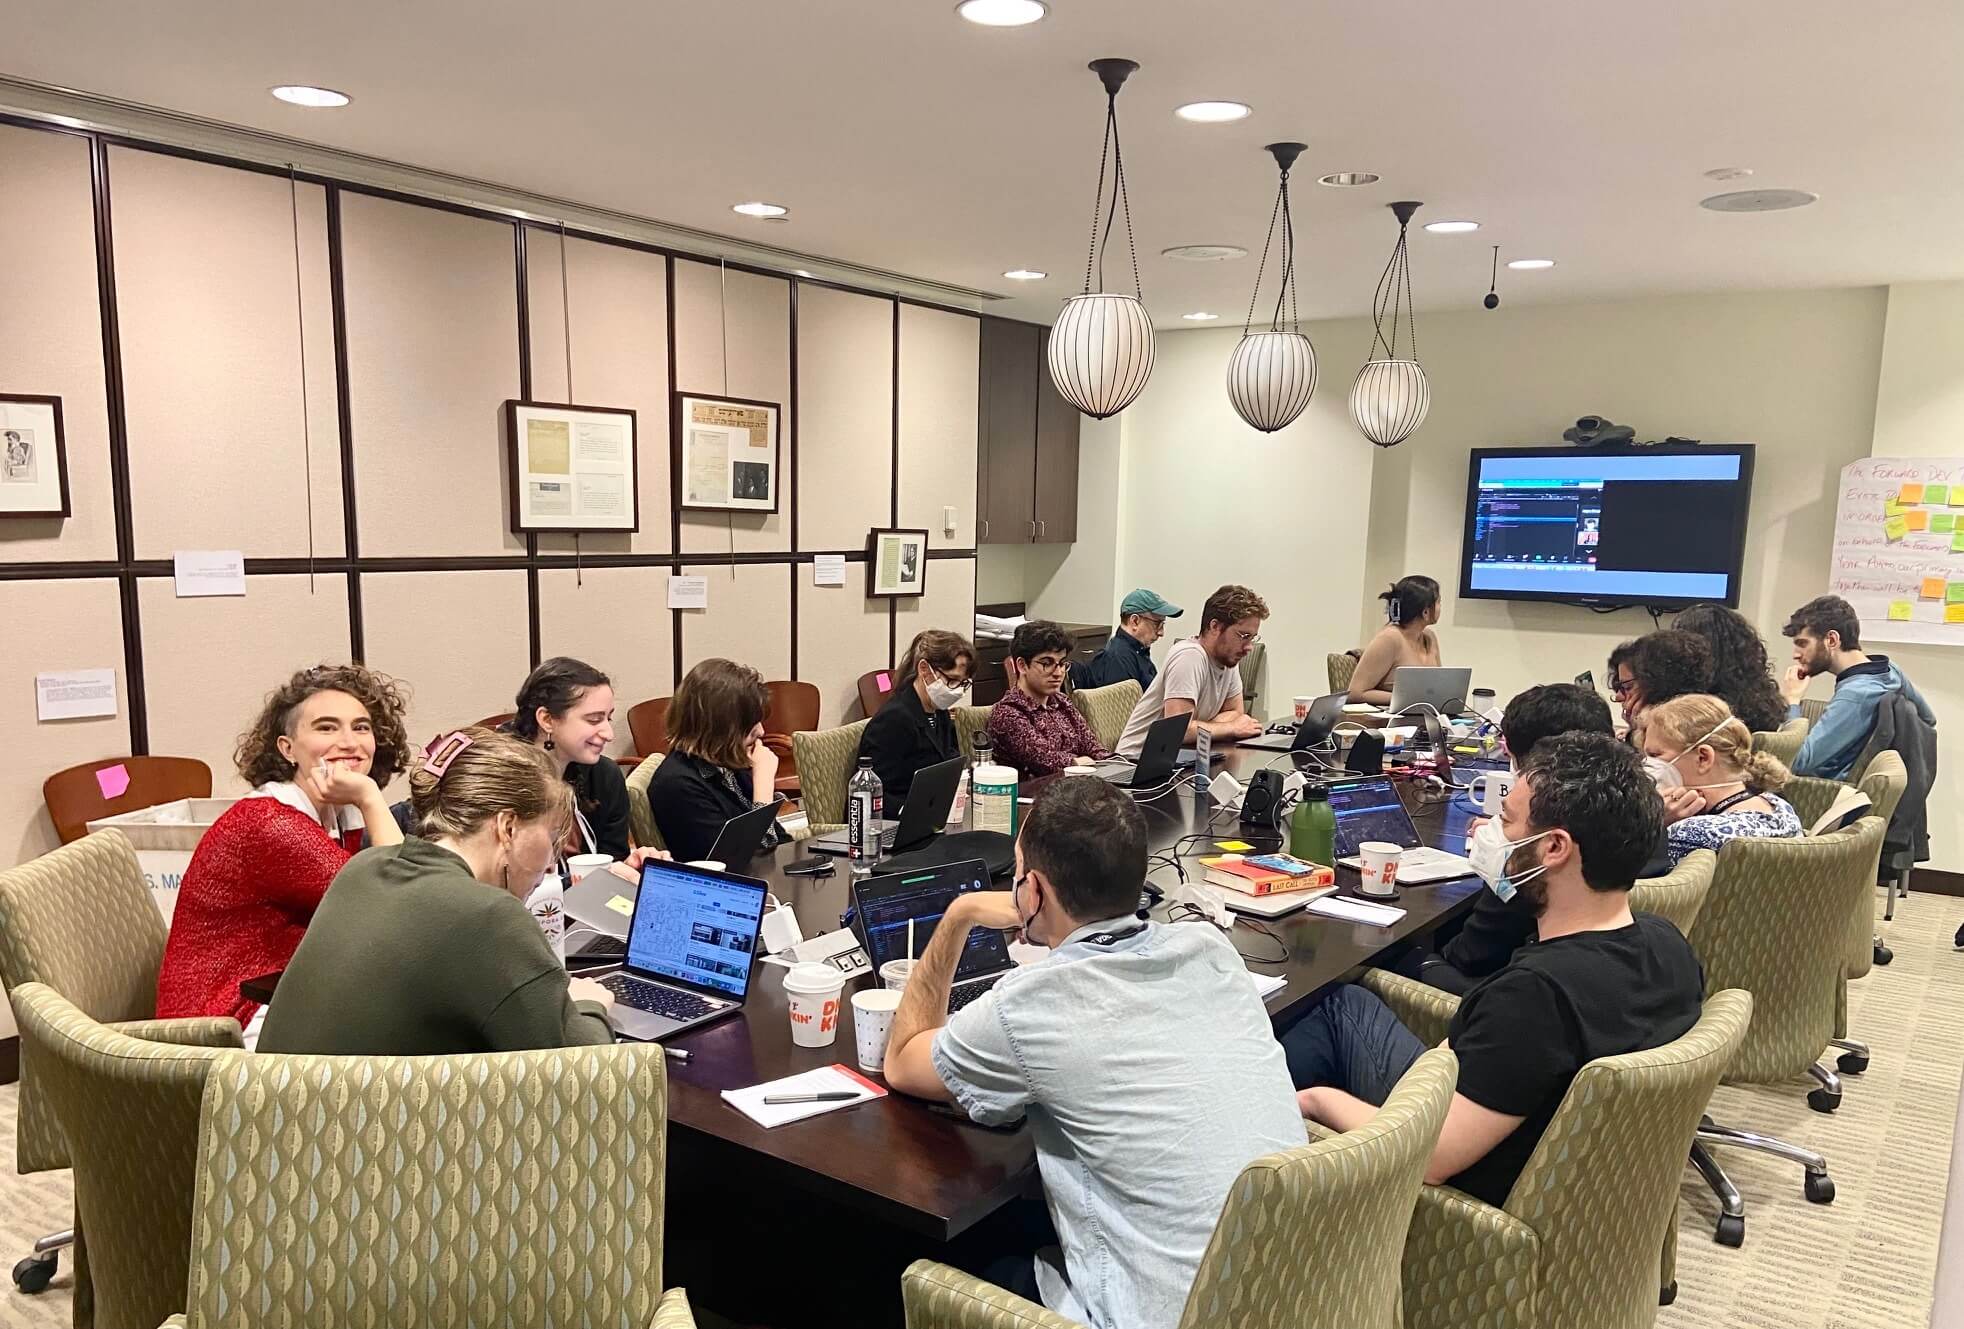 The Forward’s staff at an investigative journalism retreat in May. The Forward won a record-breaking 43 prizes at the 41st Annual AJPA Simon Rockower Awards this year.